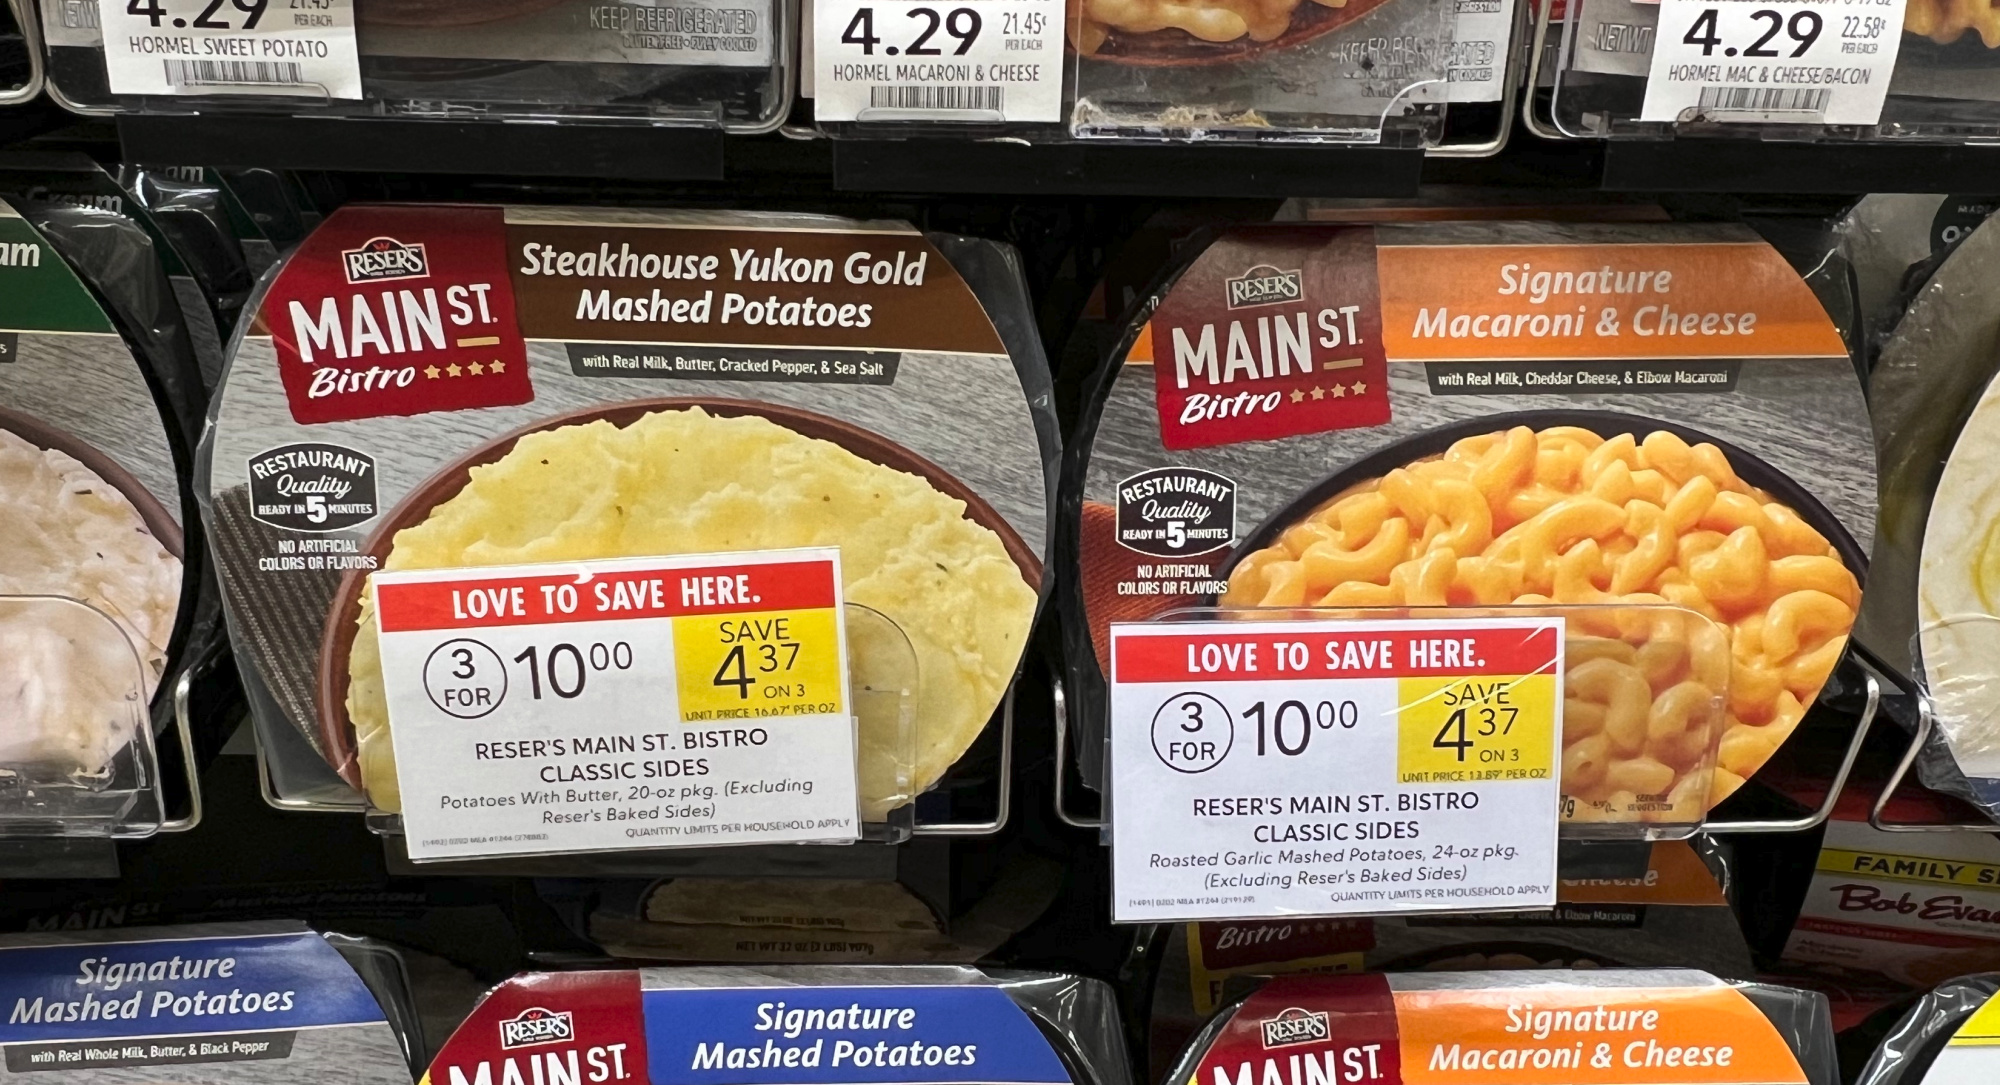 Reser’s Main St. Bistro Classic Sides As Low As $2.33 At Publix ...